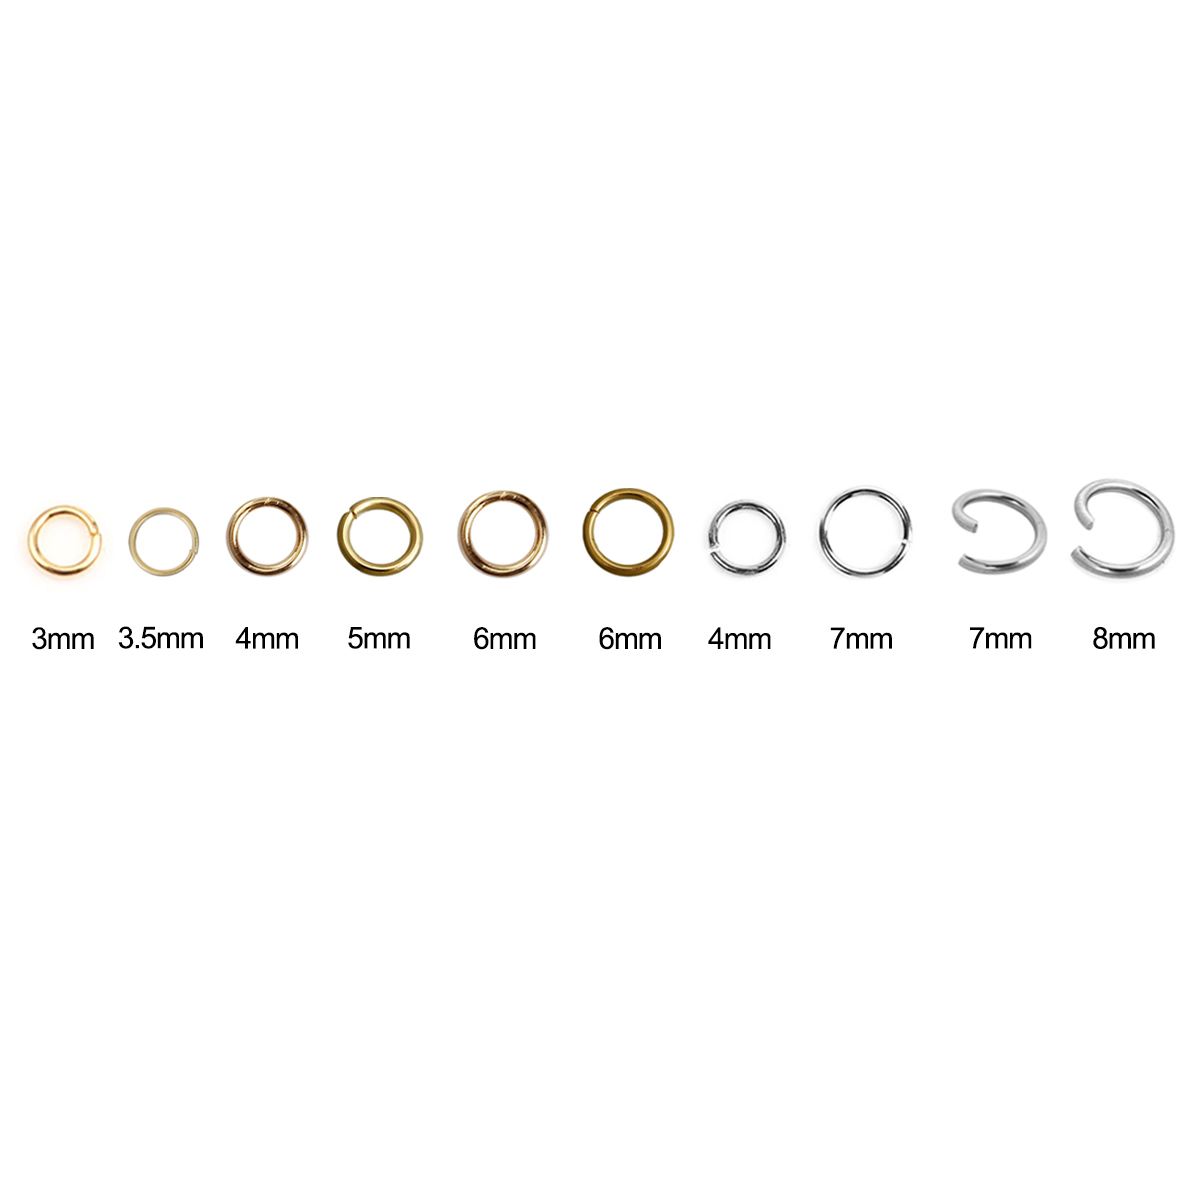 Picture of Stainless Steel Opened Jump Rings Findings Round Gold Plated 6mm( 2/8") Dia., 50 PCs